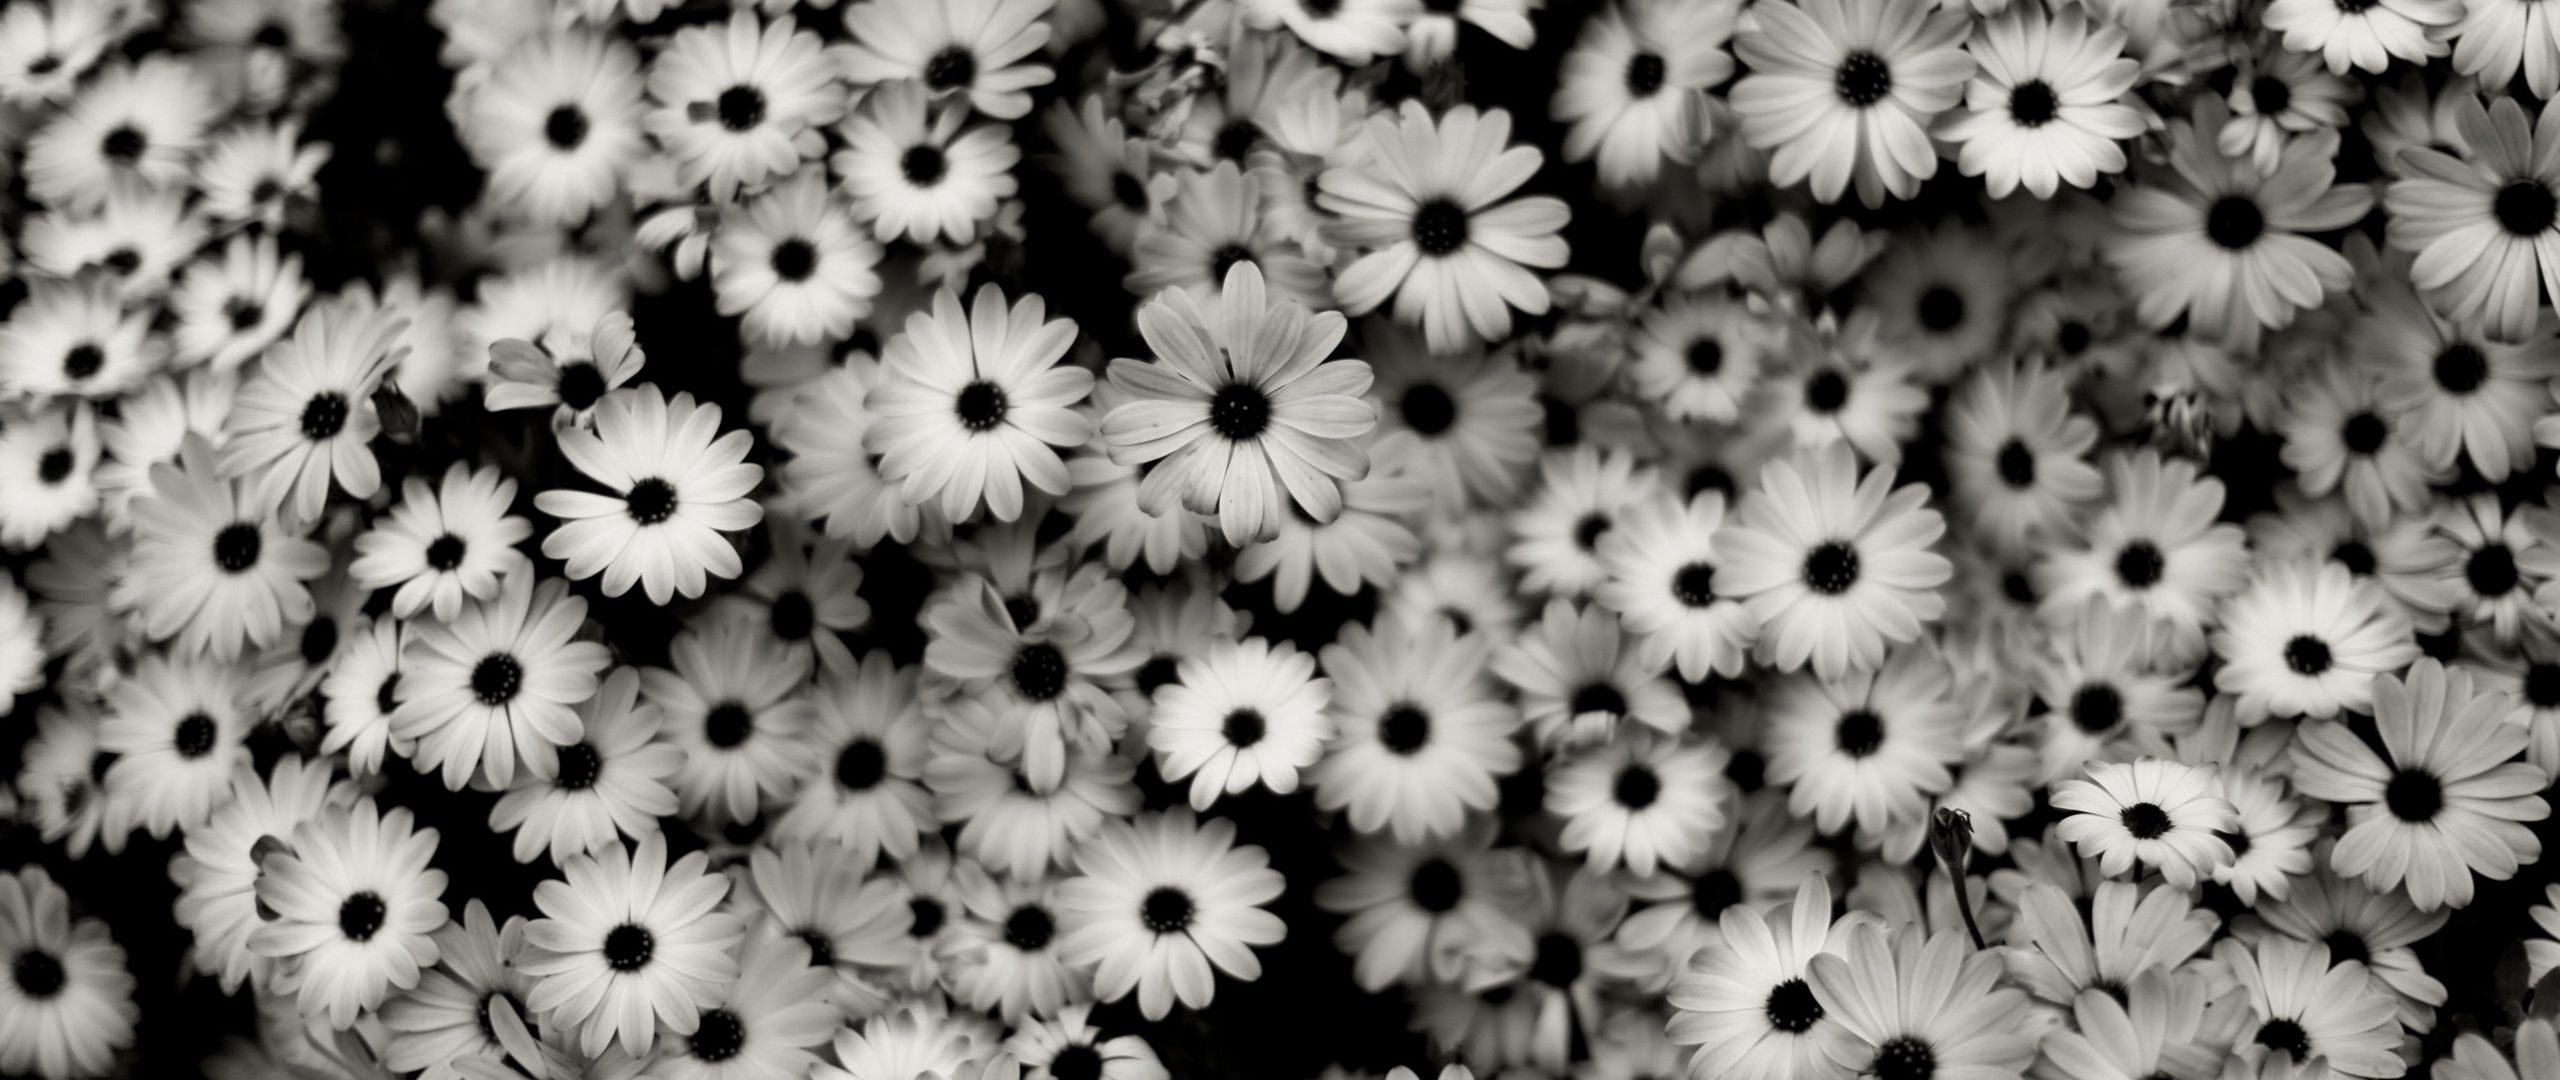 Wallpaper Black White, Flowers, Grey, Daisies - Black And White Daisy , HD Wallpaper & Backgrounds